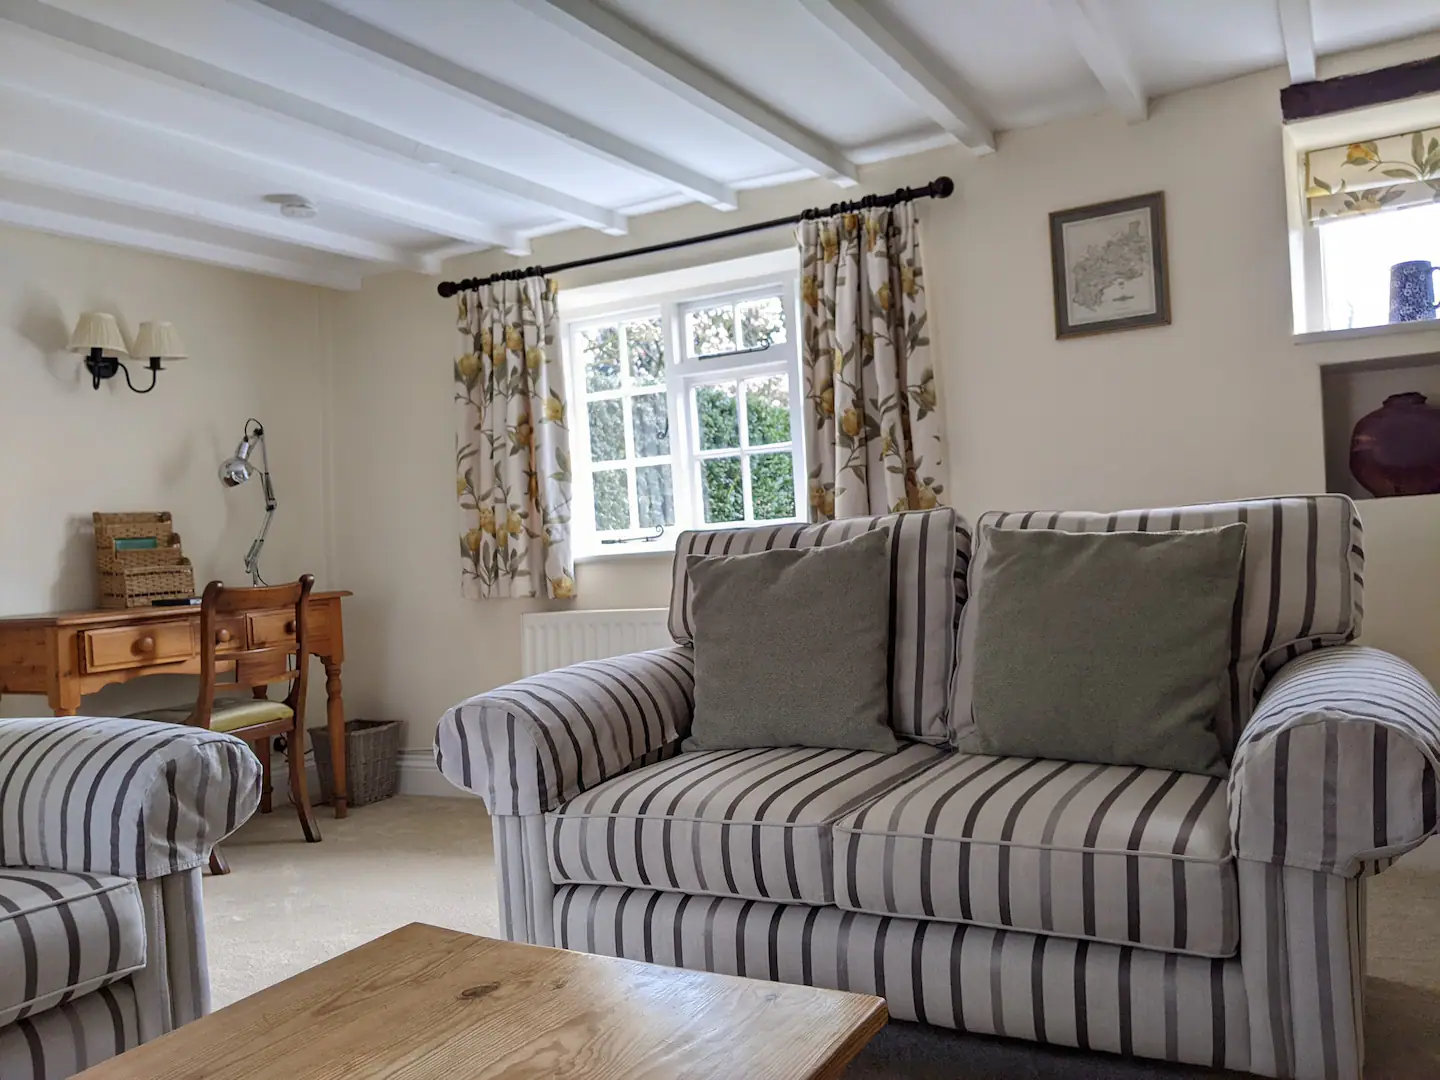 Broughtons Cottage, luxury self catering, Broughtons, forest of dean, gloucestershire, holiday cottage, self-catering, self catering cottage, holiday let, 4 star accommodation, Cheltenham, Ledbury